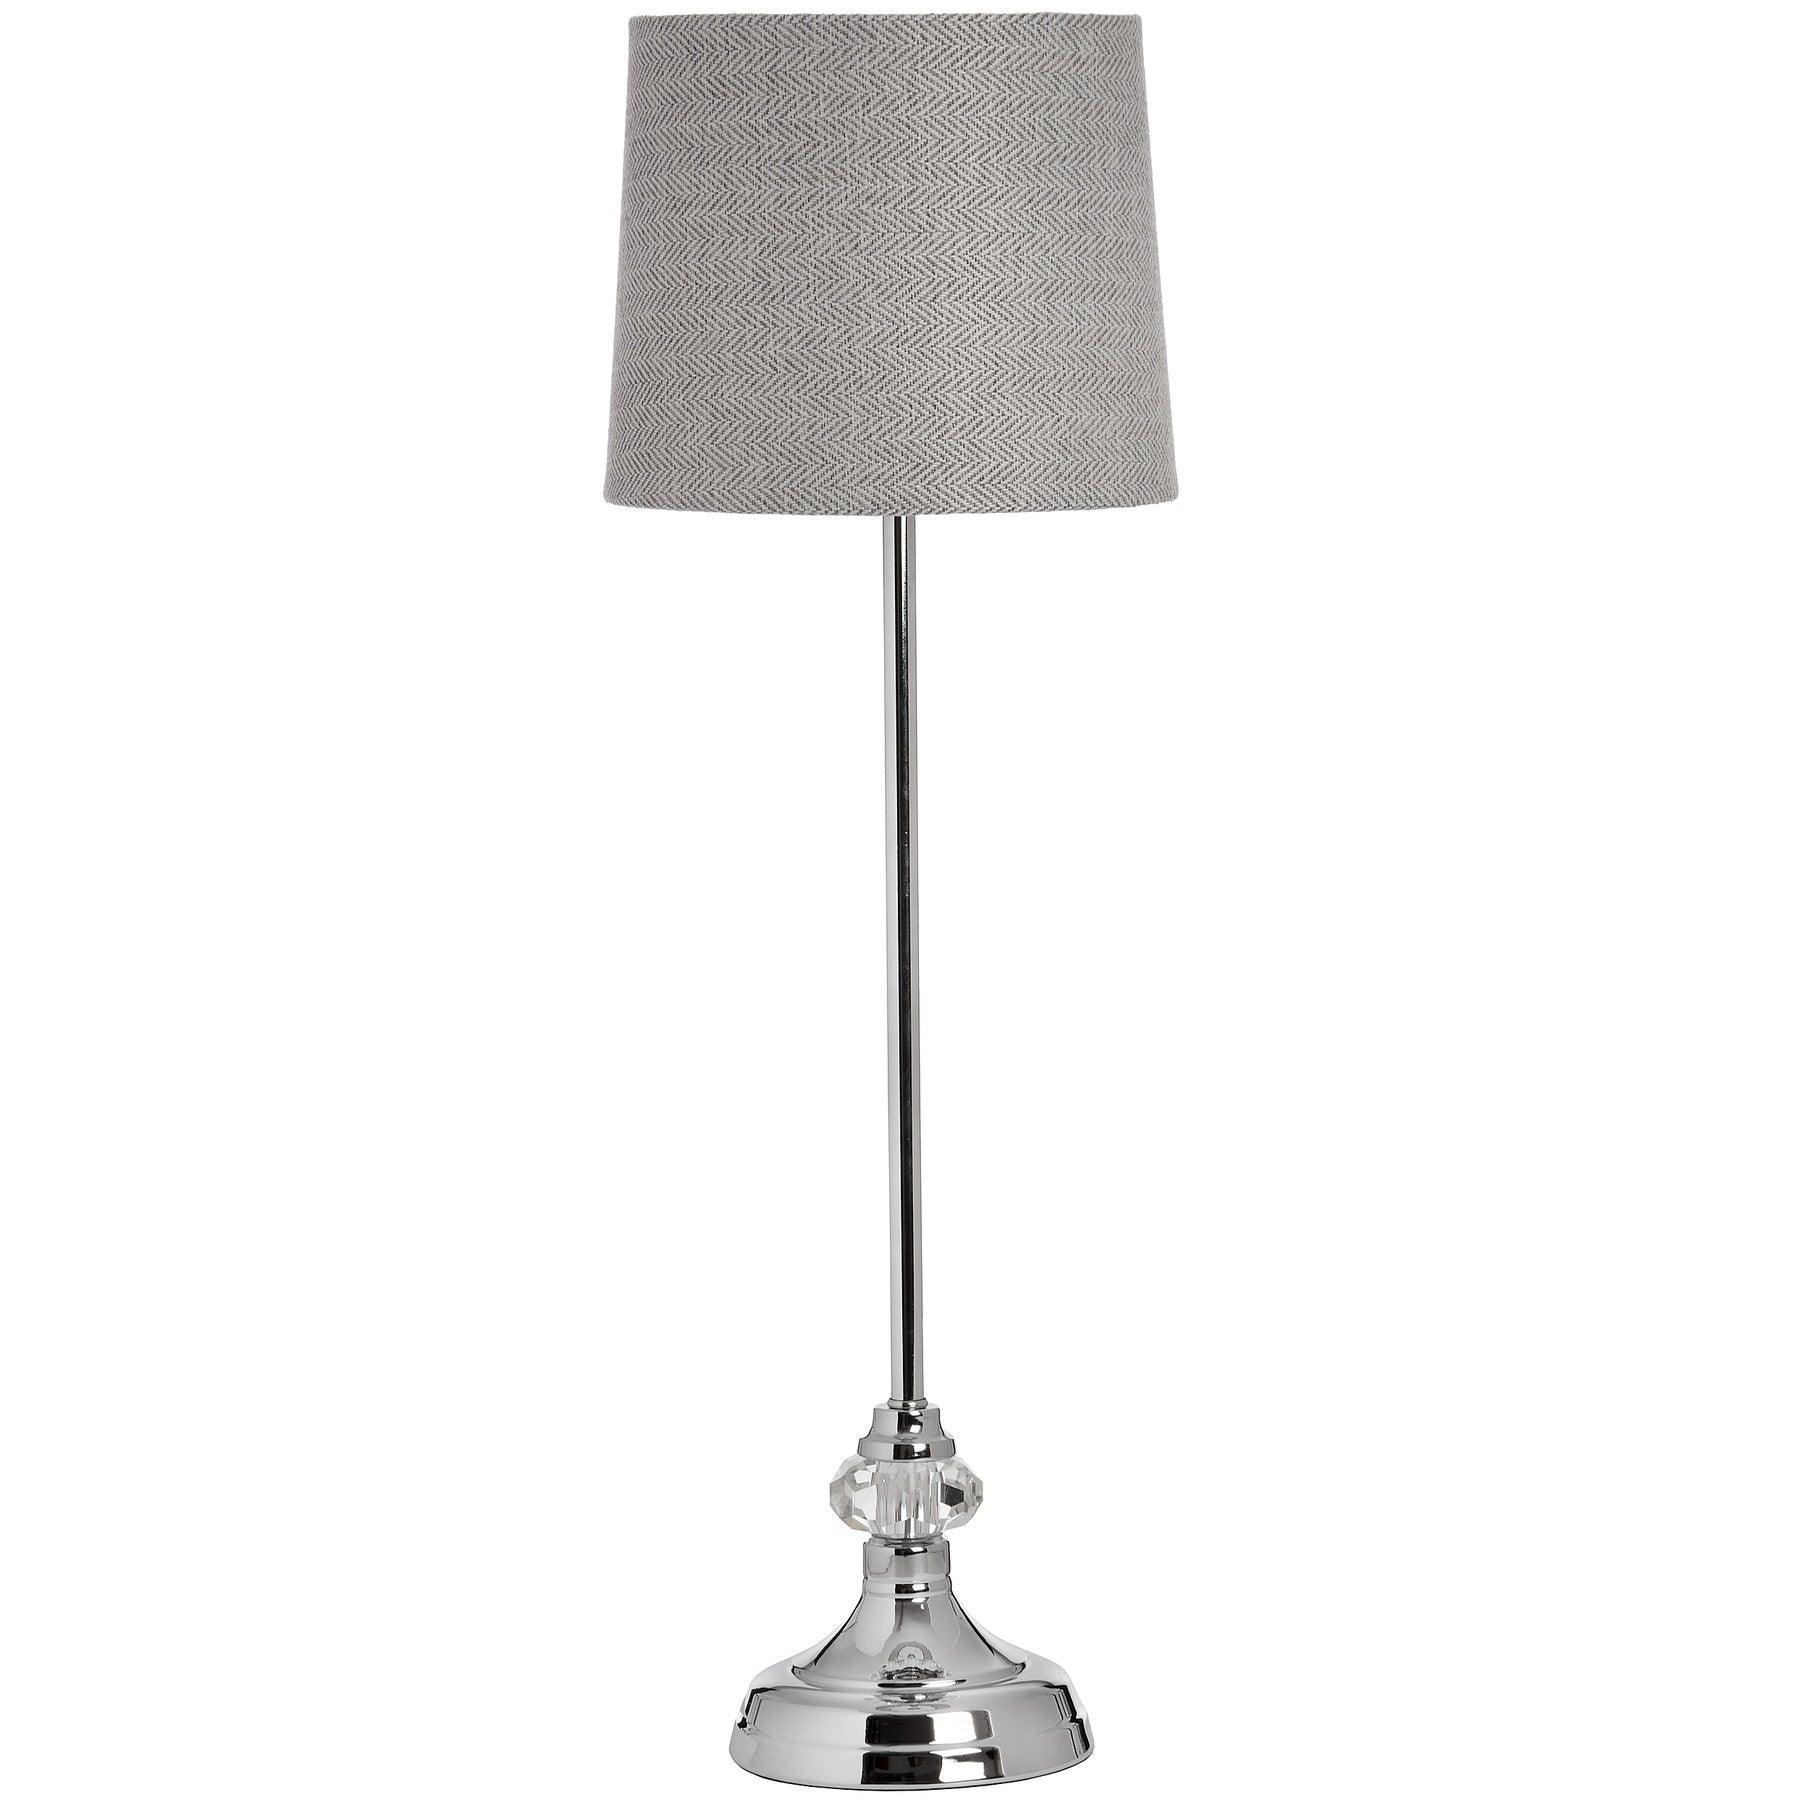 View Genoa Chrome Table Lamp information